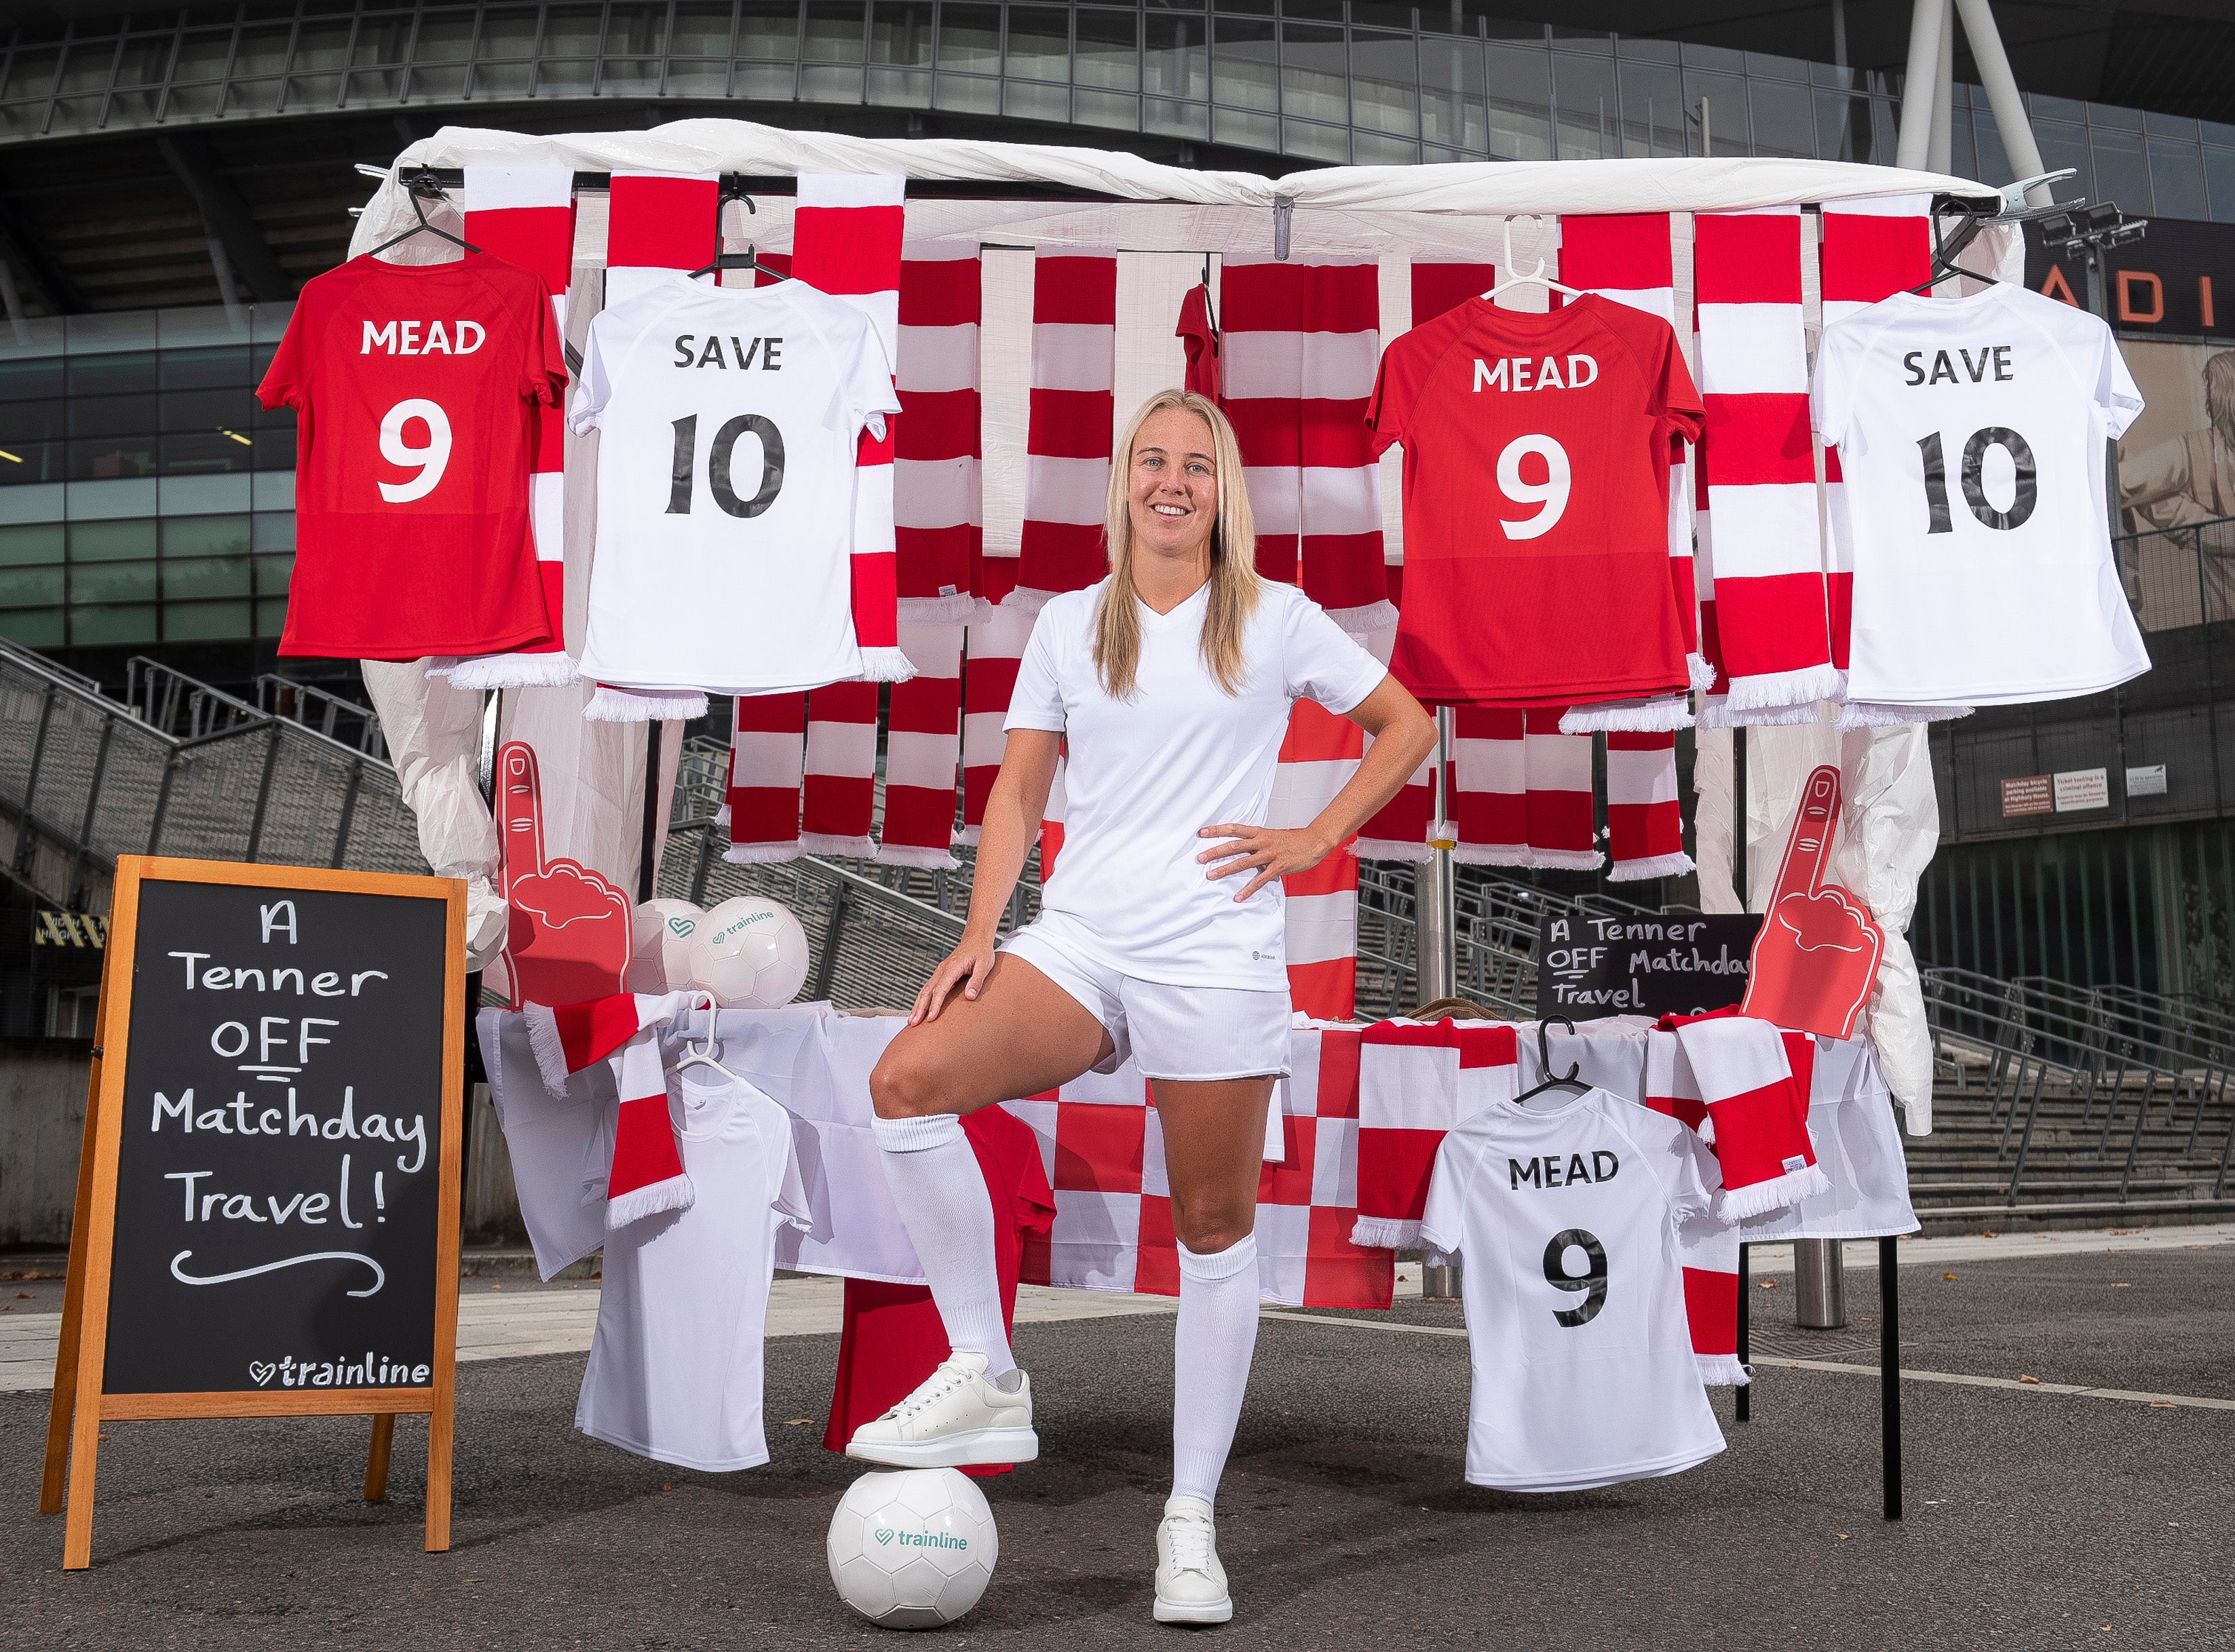 Beth Mead launches the Trainline ‘Tenner off Match Day Travel’ campaign, offering fans travelling to professional women’s fixtures £10 off rail travel by heading to the Trainline website (Will Ireland/PinPep Media)